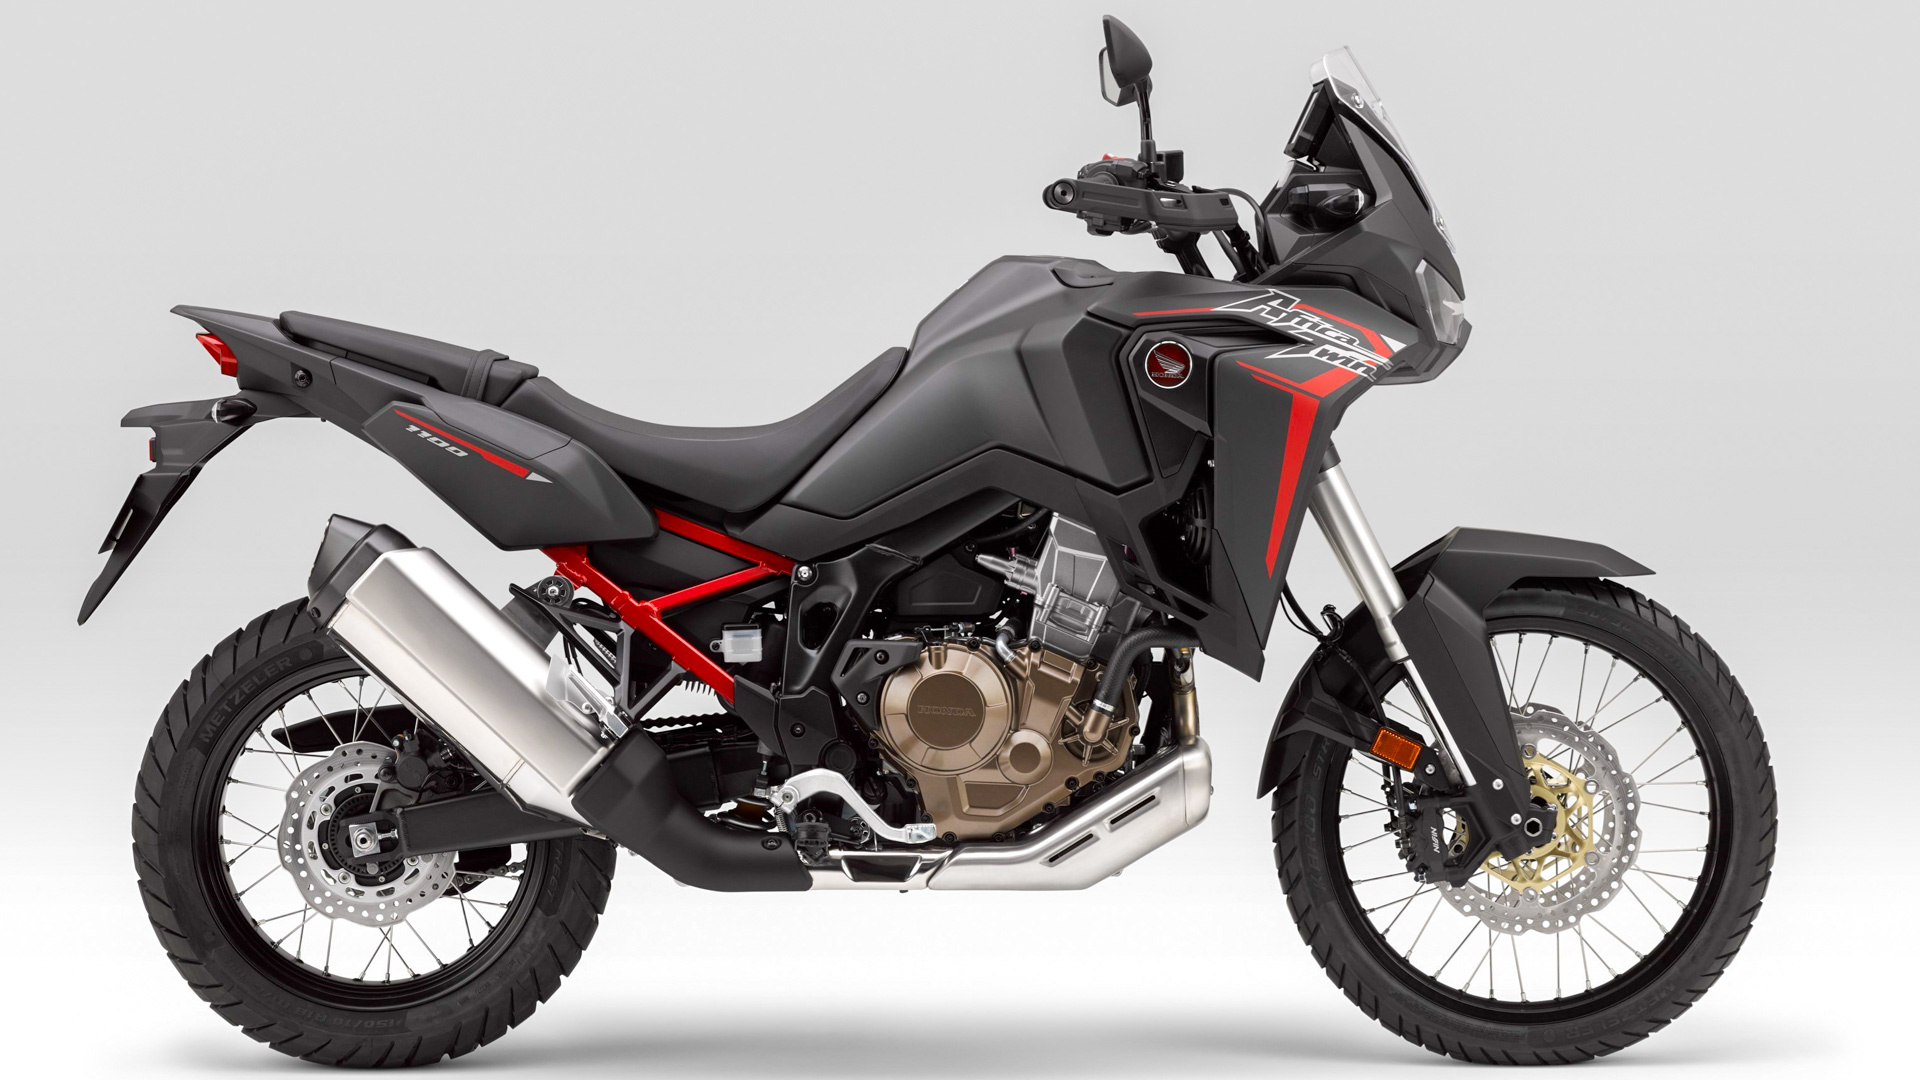 Honda Africa Twin, 2021 color options, Adventure motorcycle, Bright choices, 1920x1080 Full HD Desktop